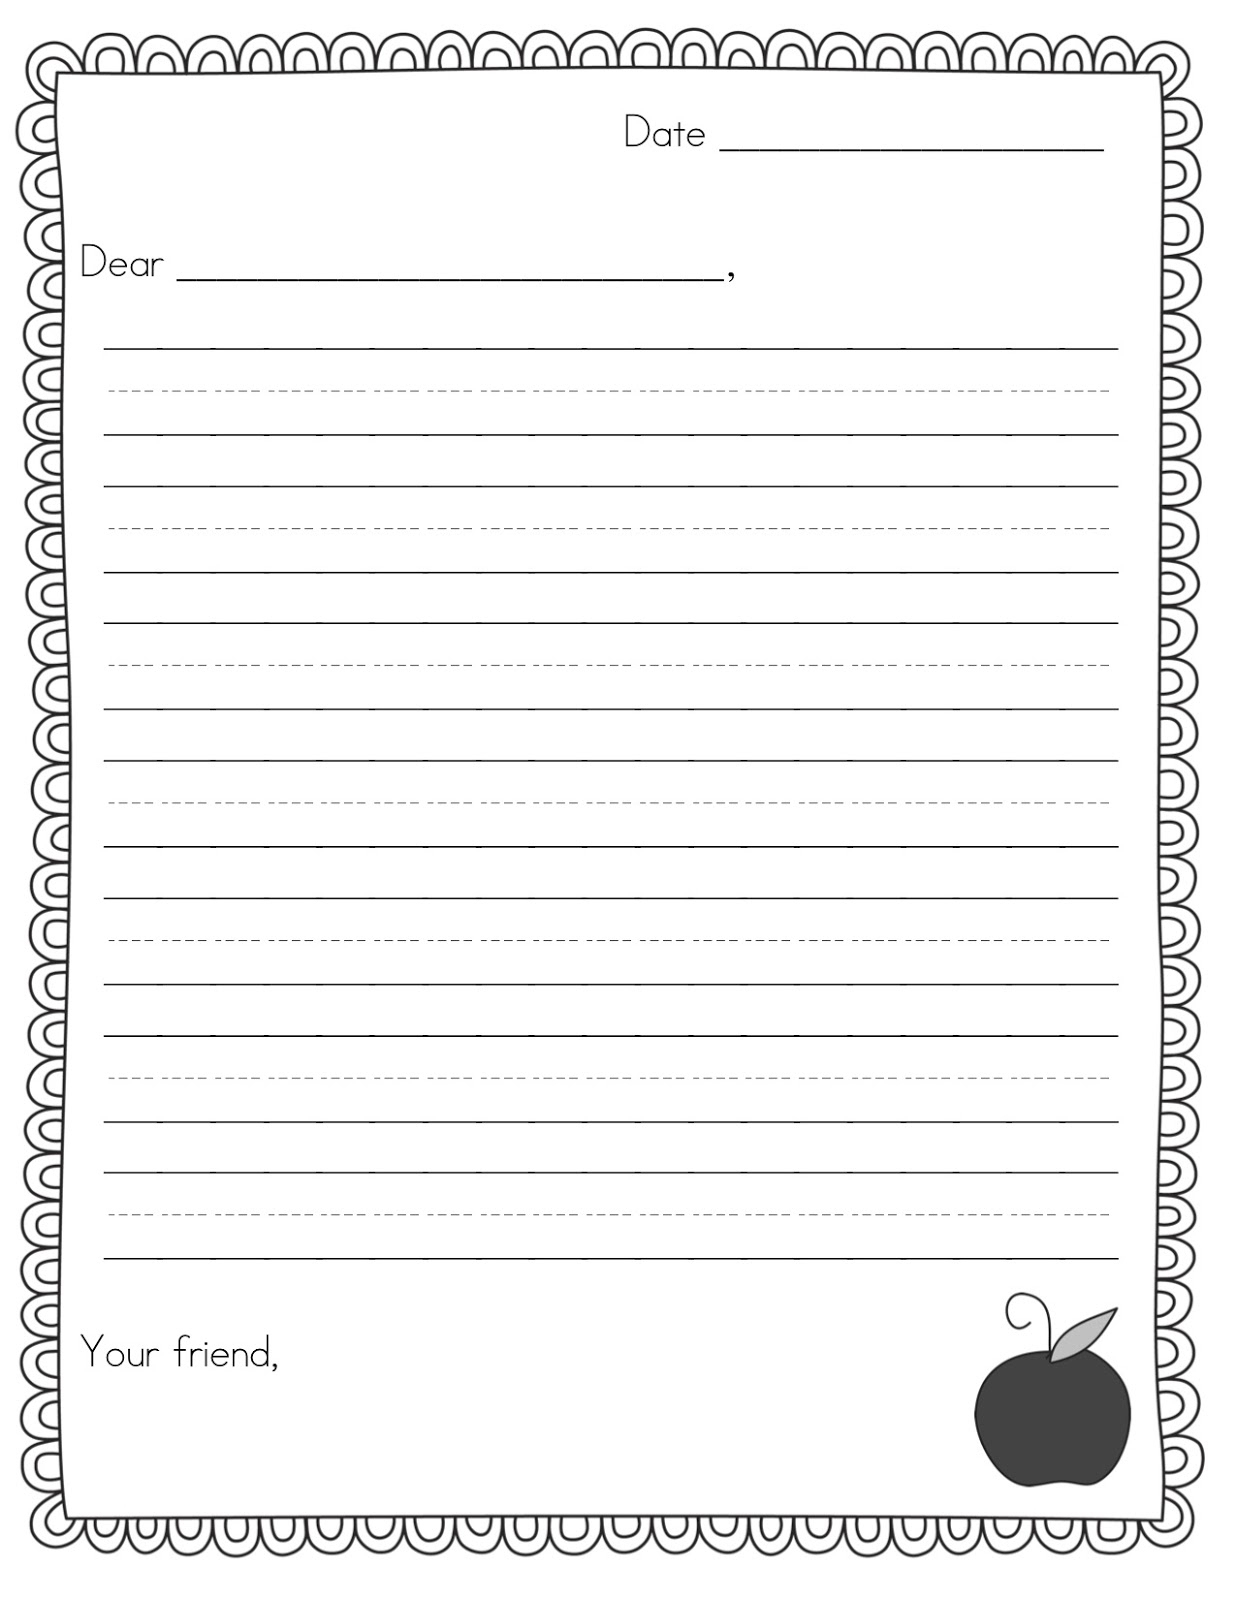 Free Printable Letter Writing Templates | Reactorread - Free Printable Letter Writing Templates